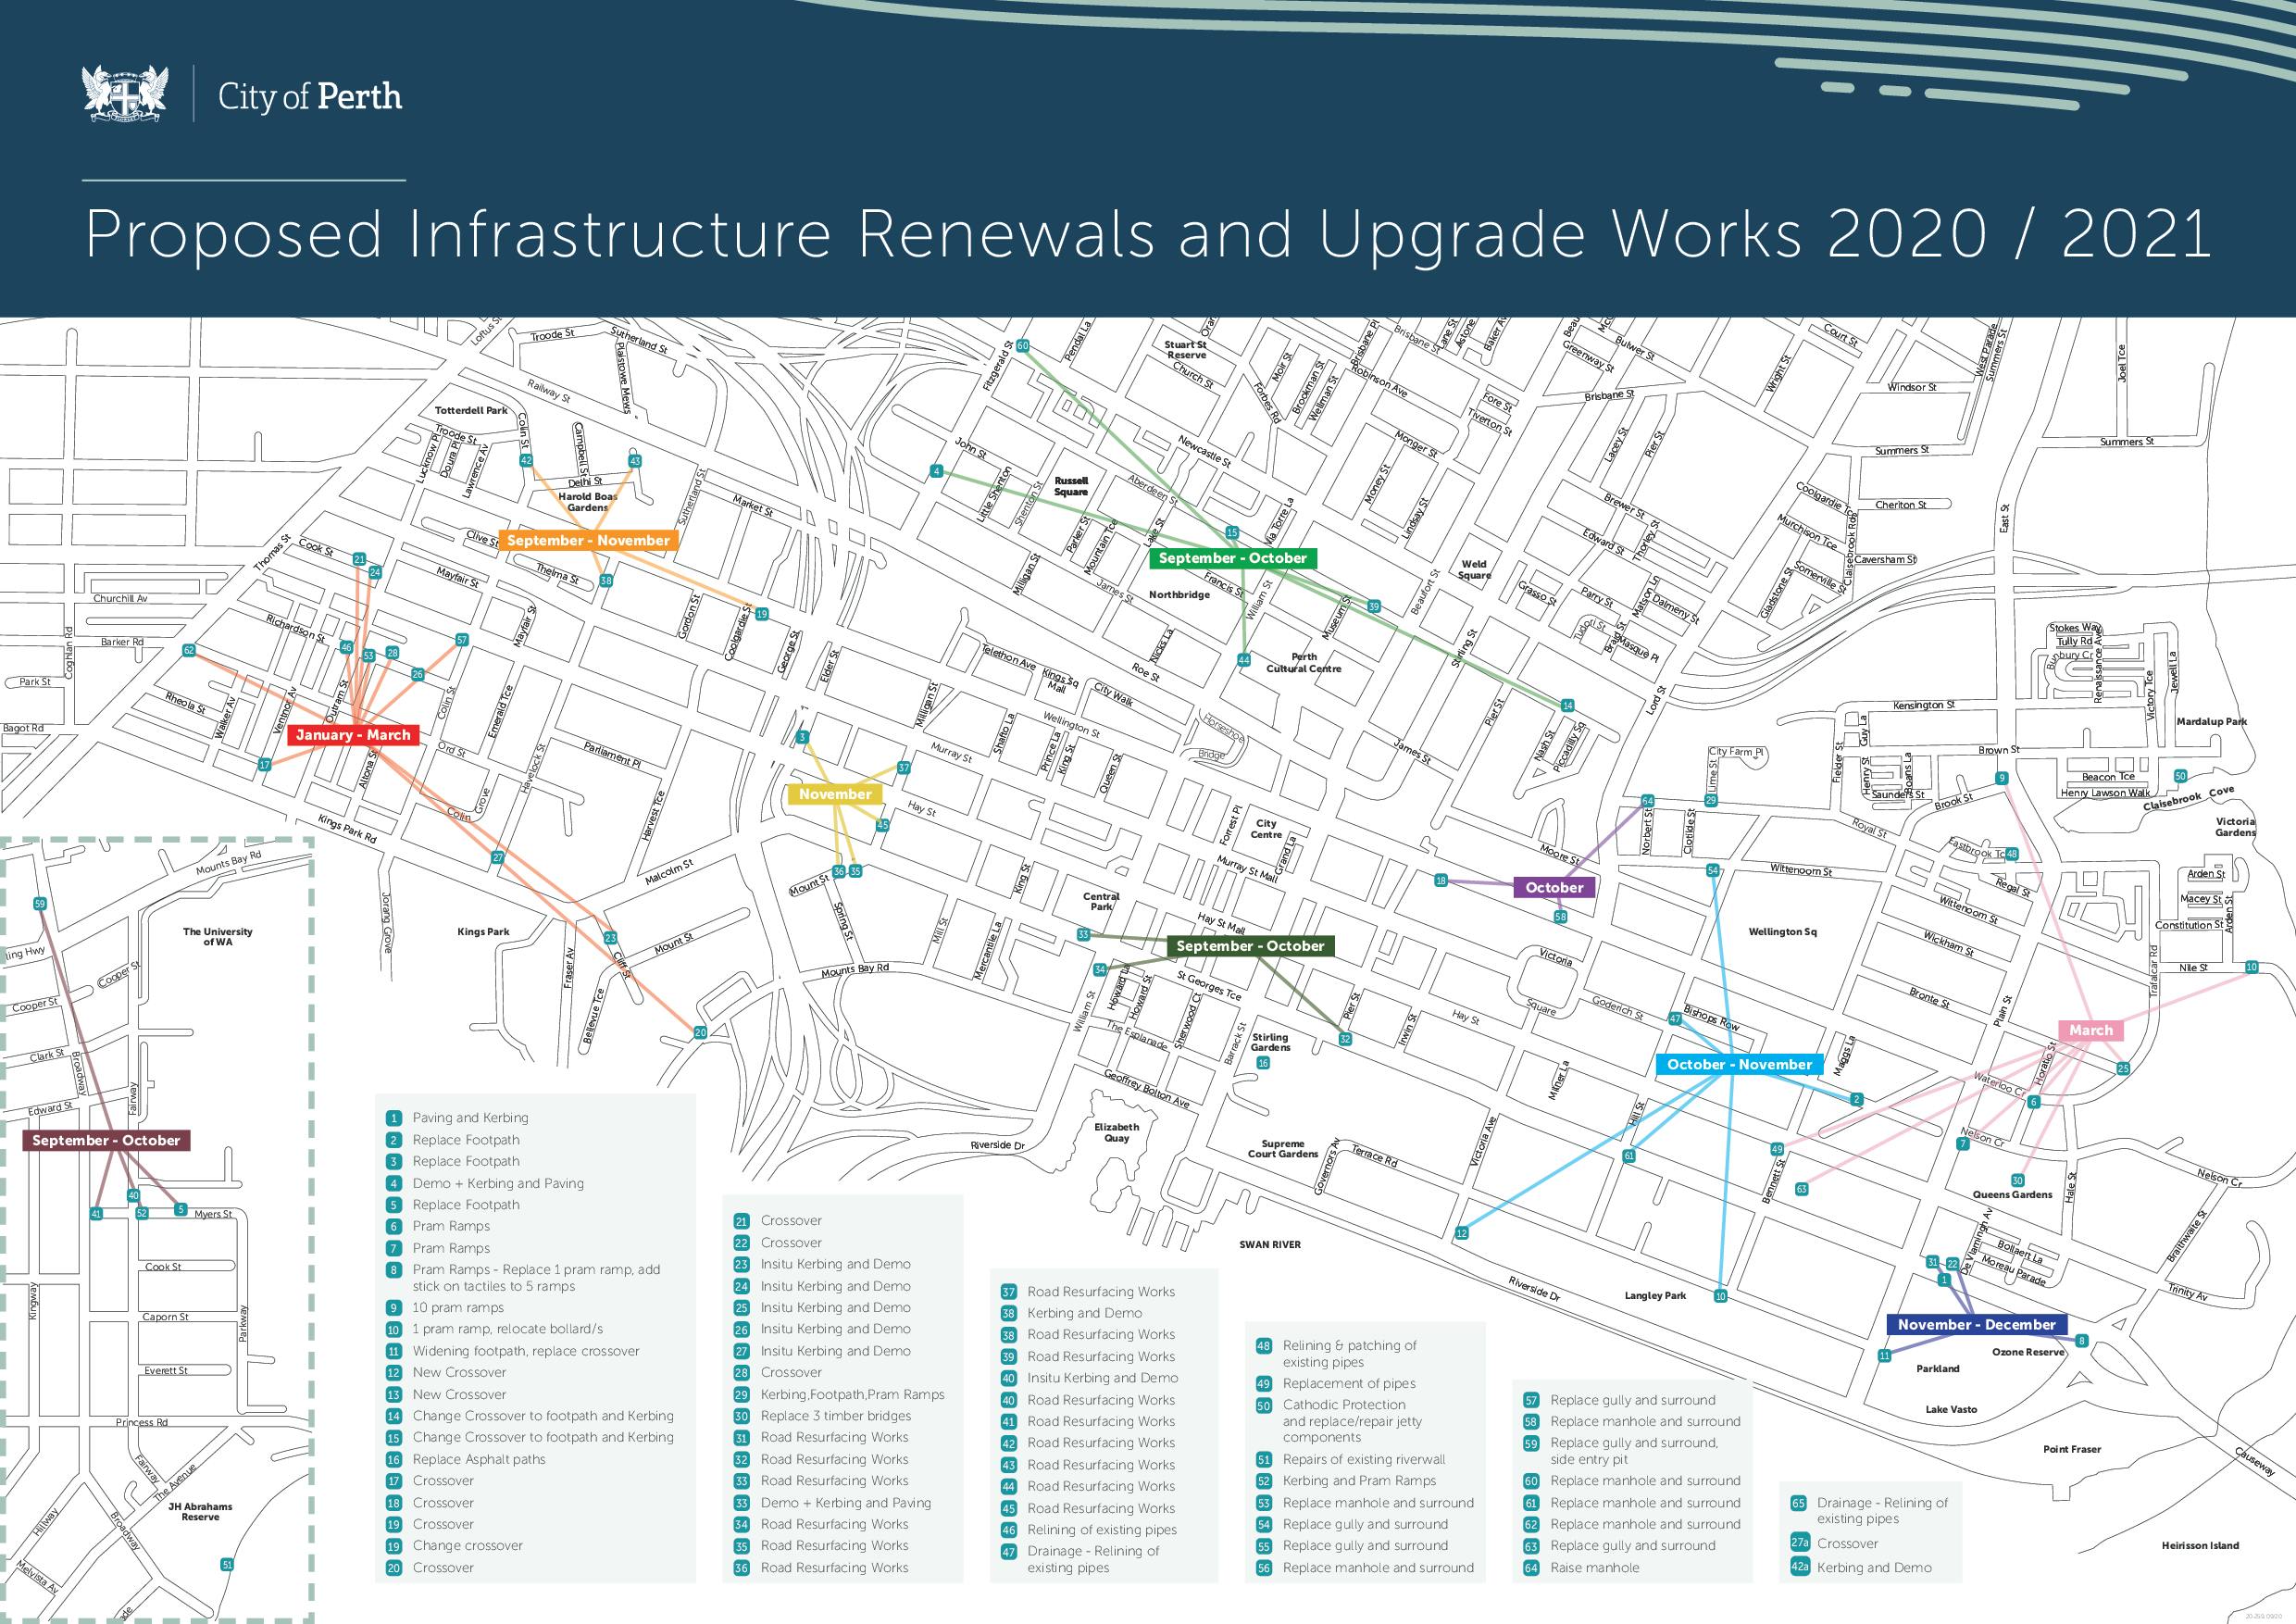 CITY_OF_PERTH_INFRASTRUCTURE_RENEWALS_MAP_.png